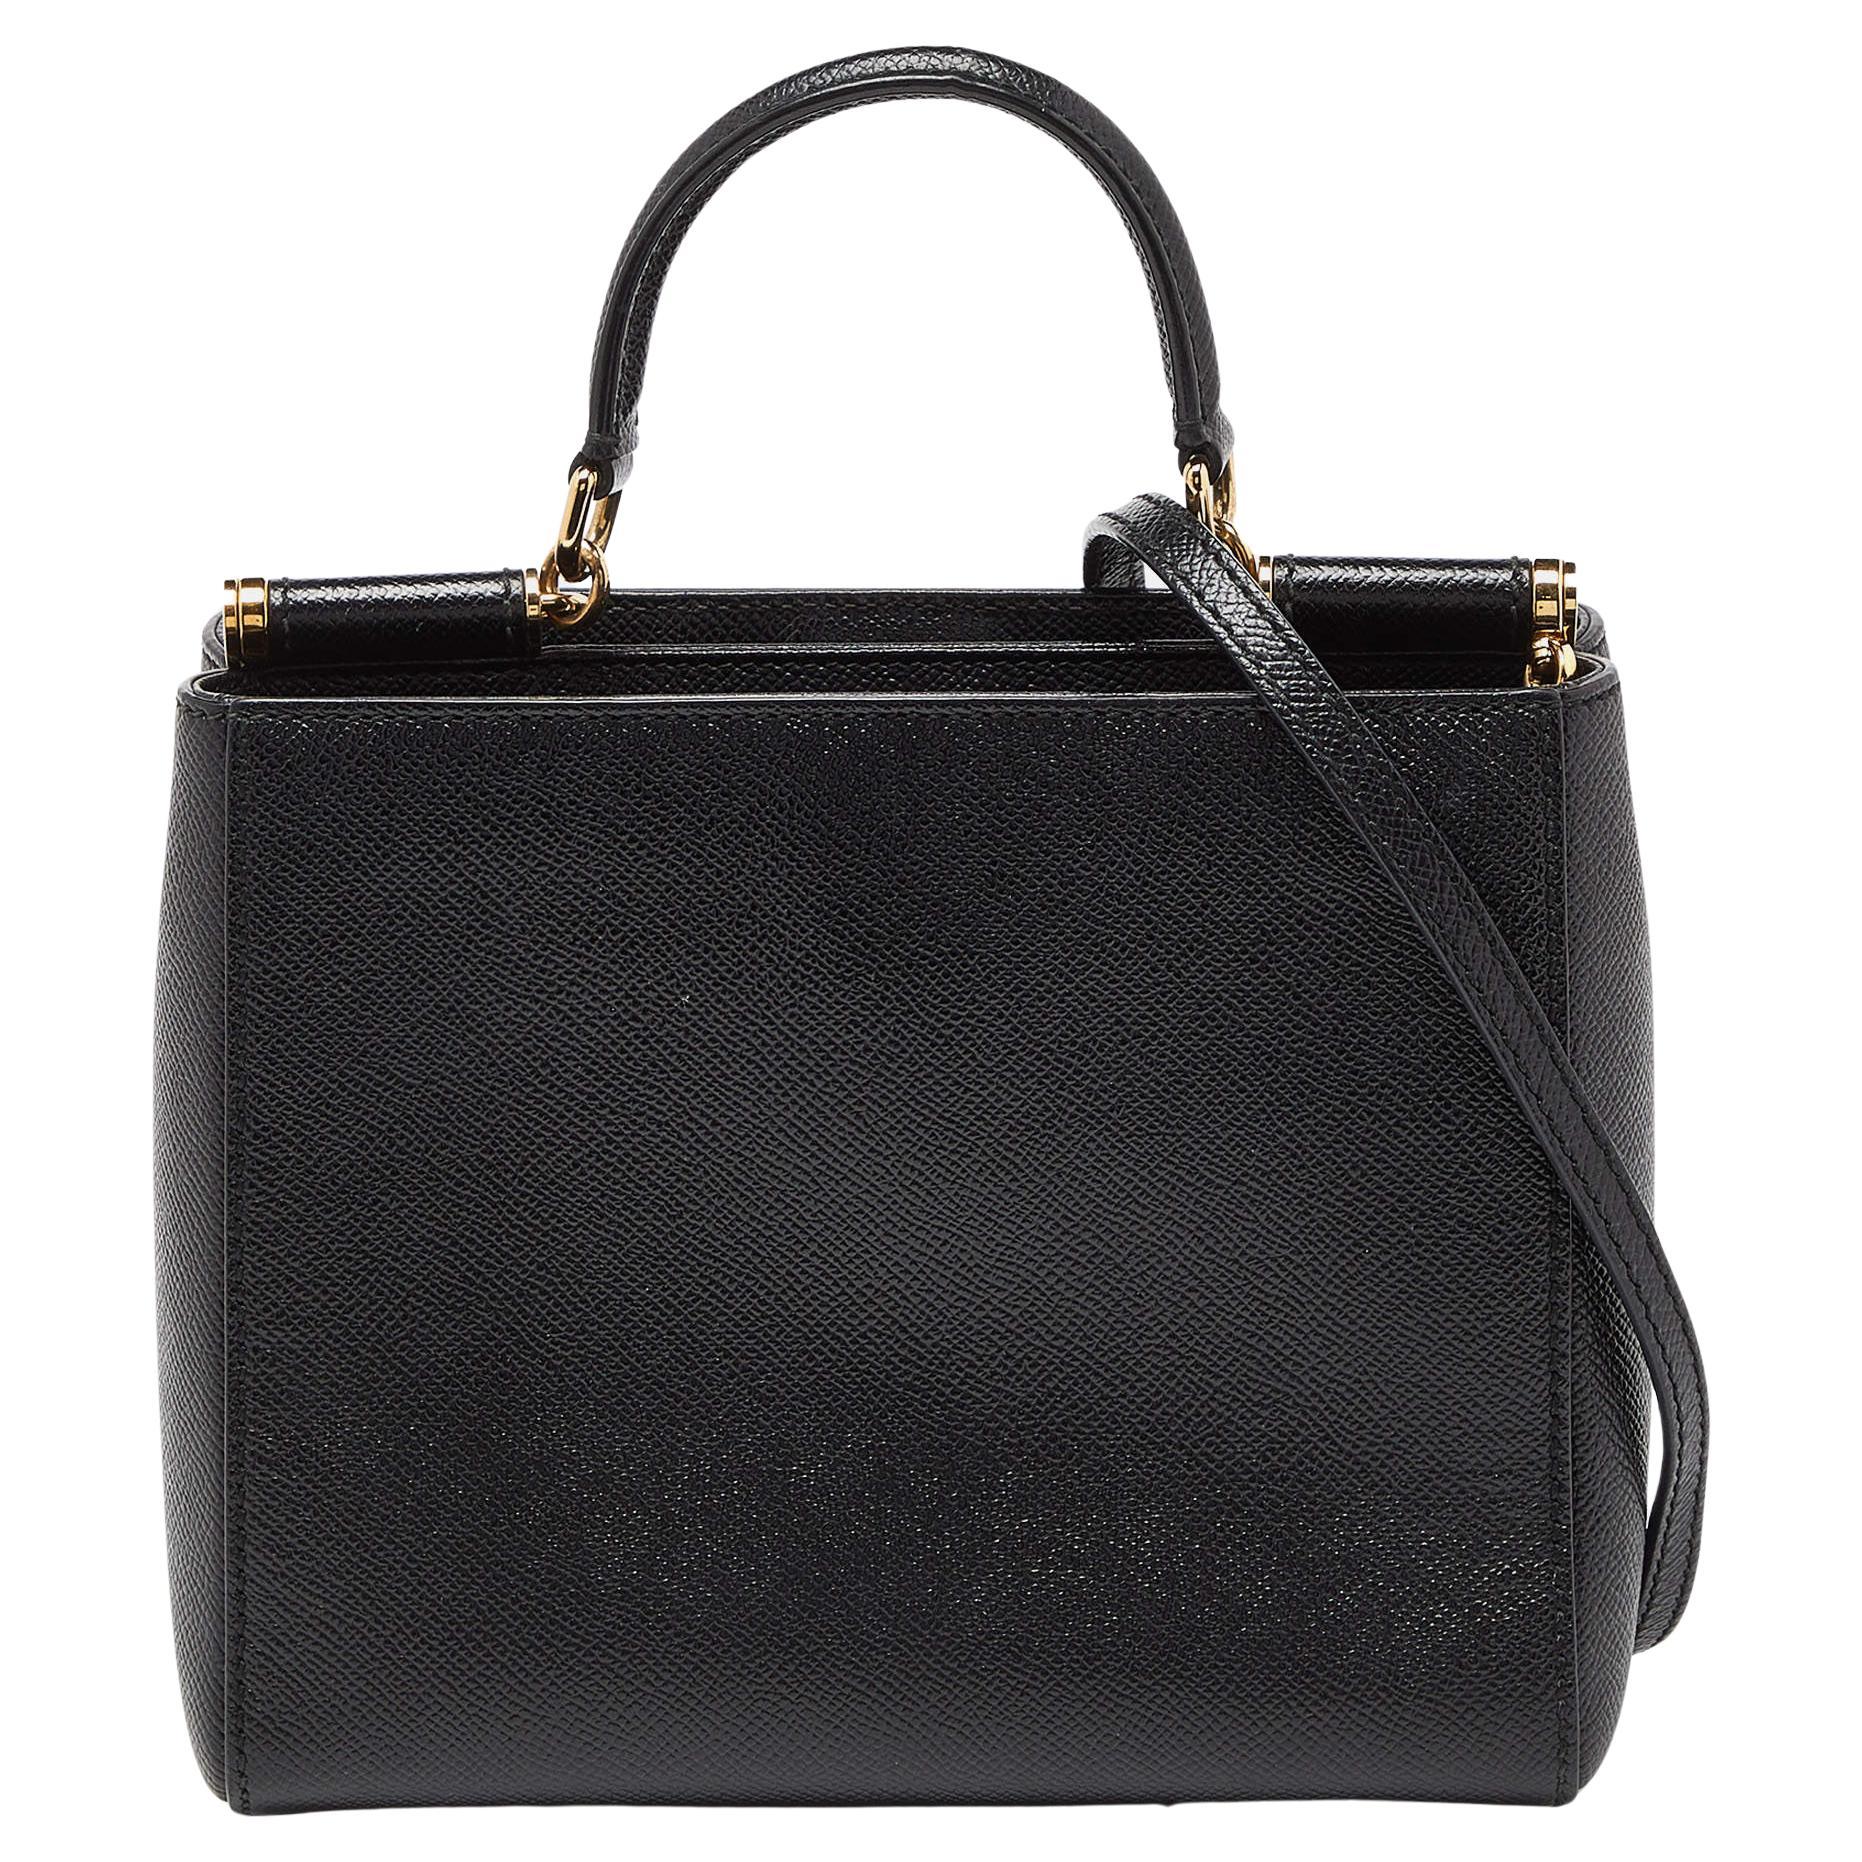 Dolce & Gabbana Black Leather Miss Sicily Tote For Sale